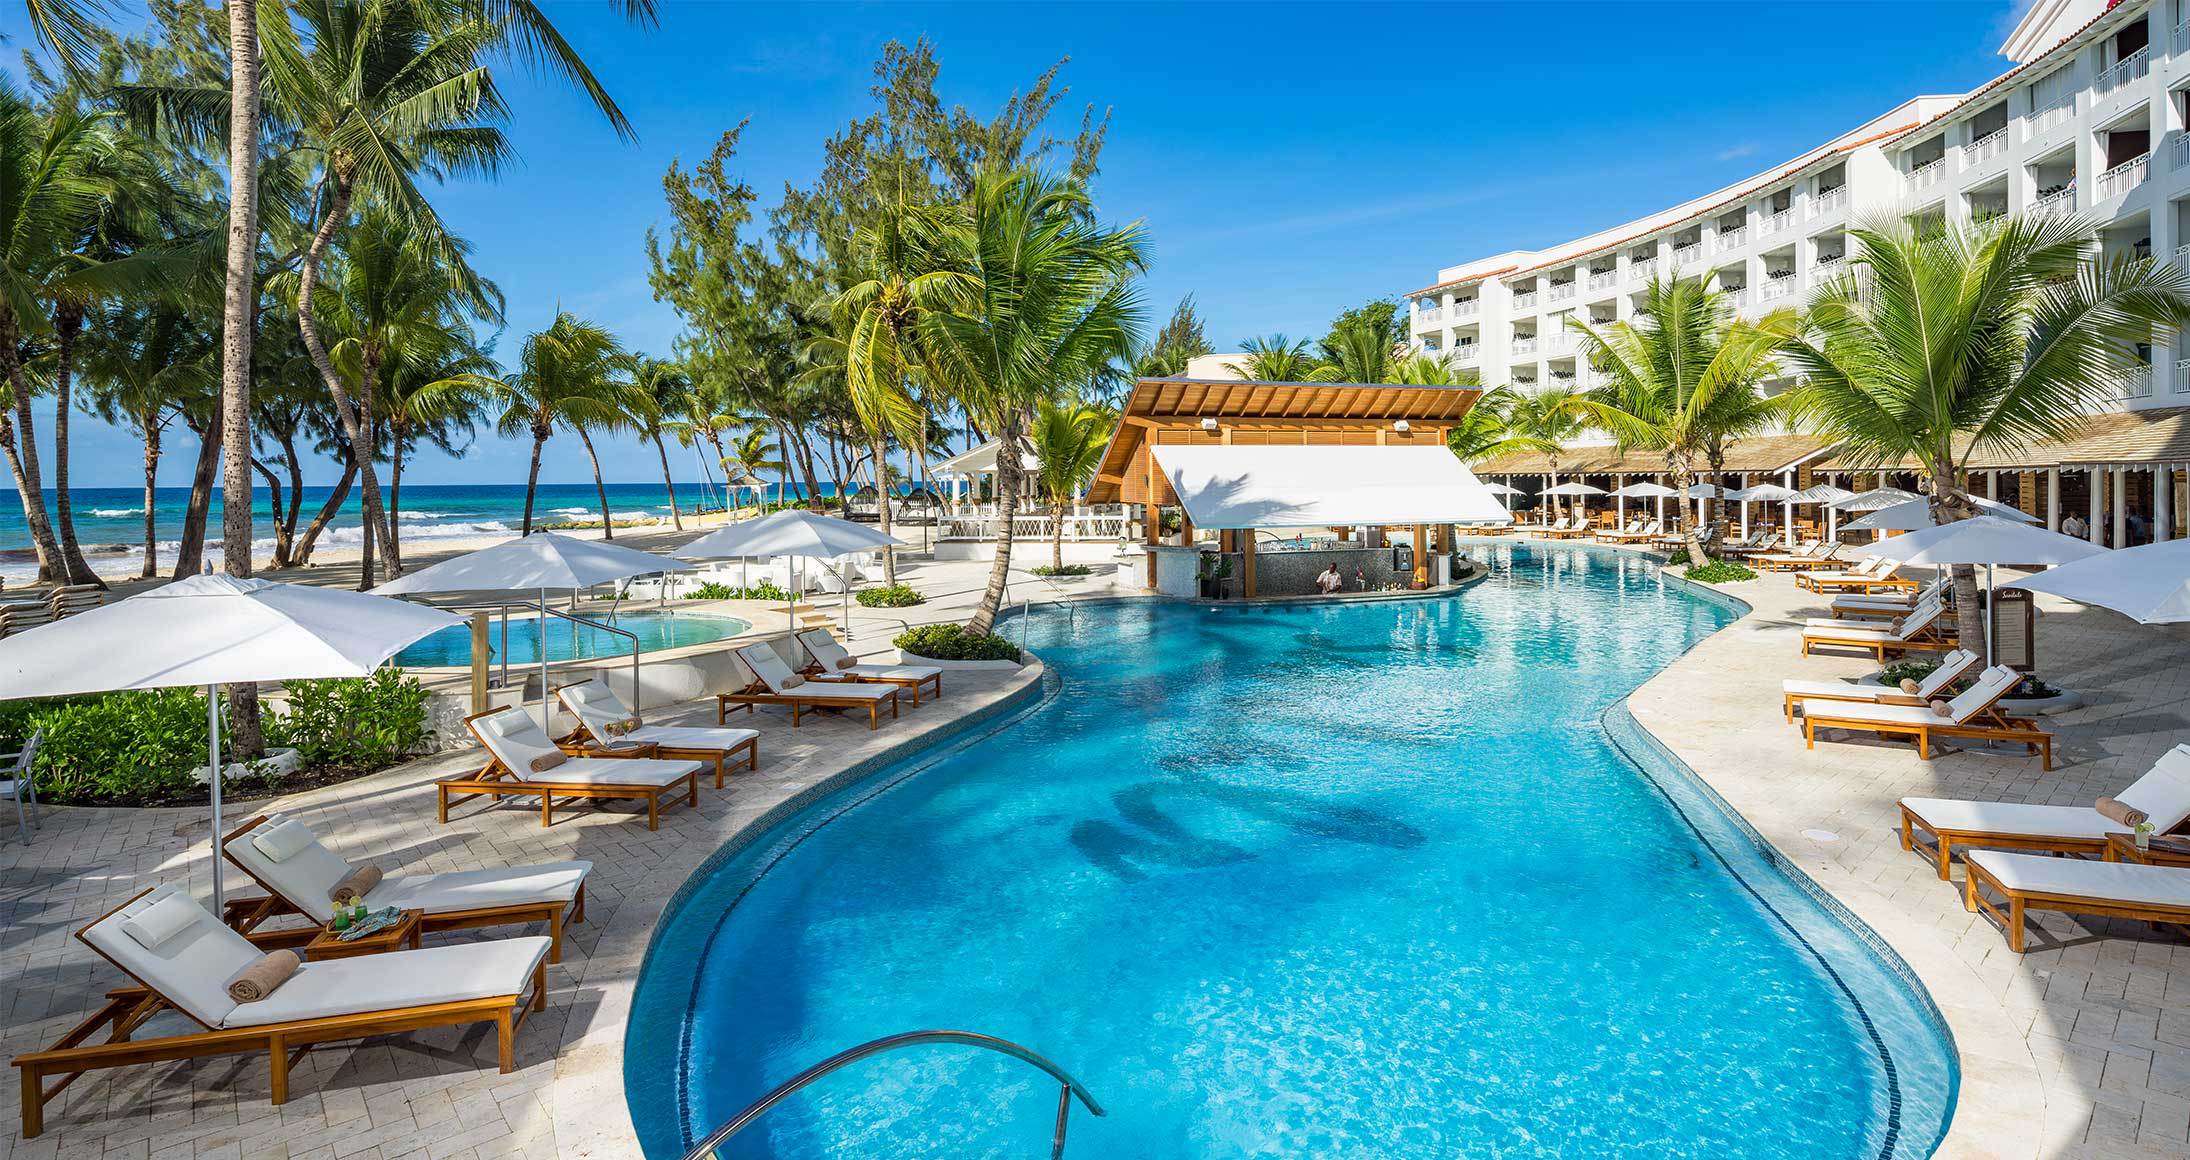 10 Best All Inclusive Resorts in Barbados